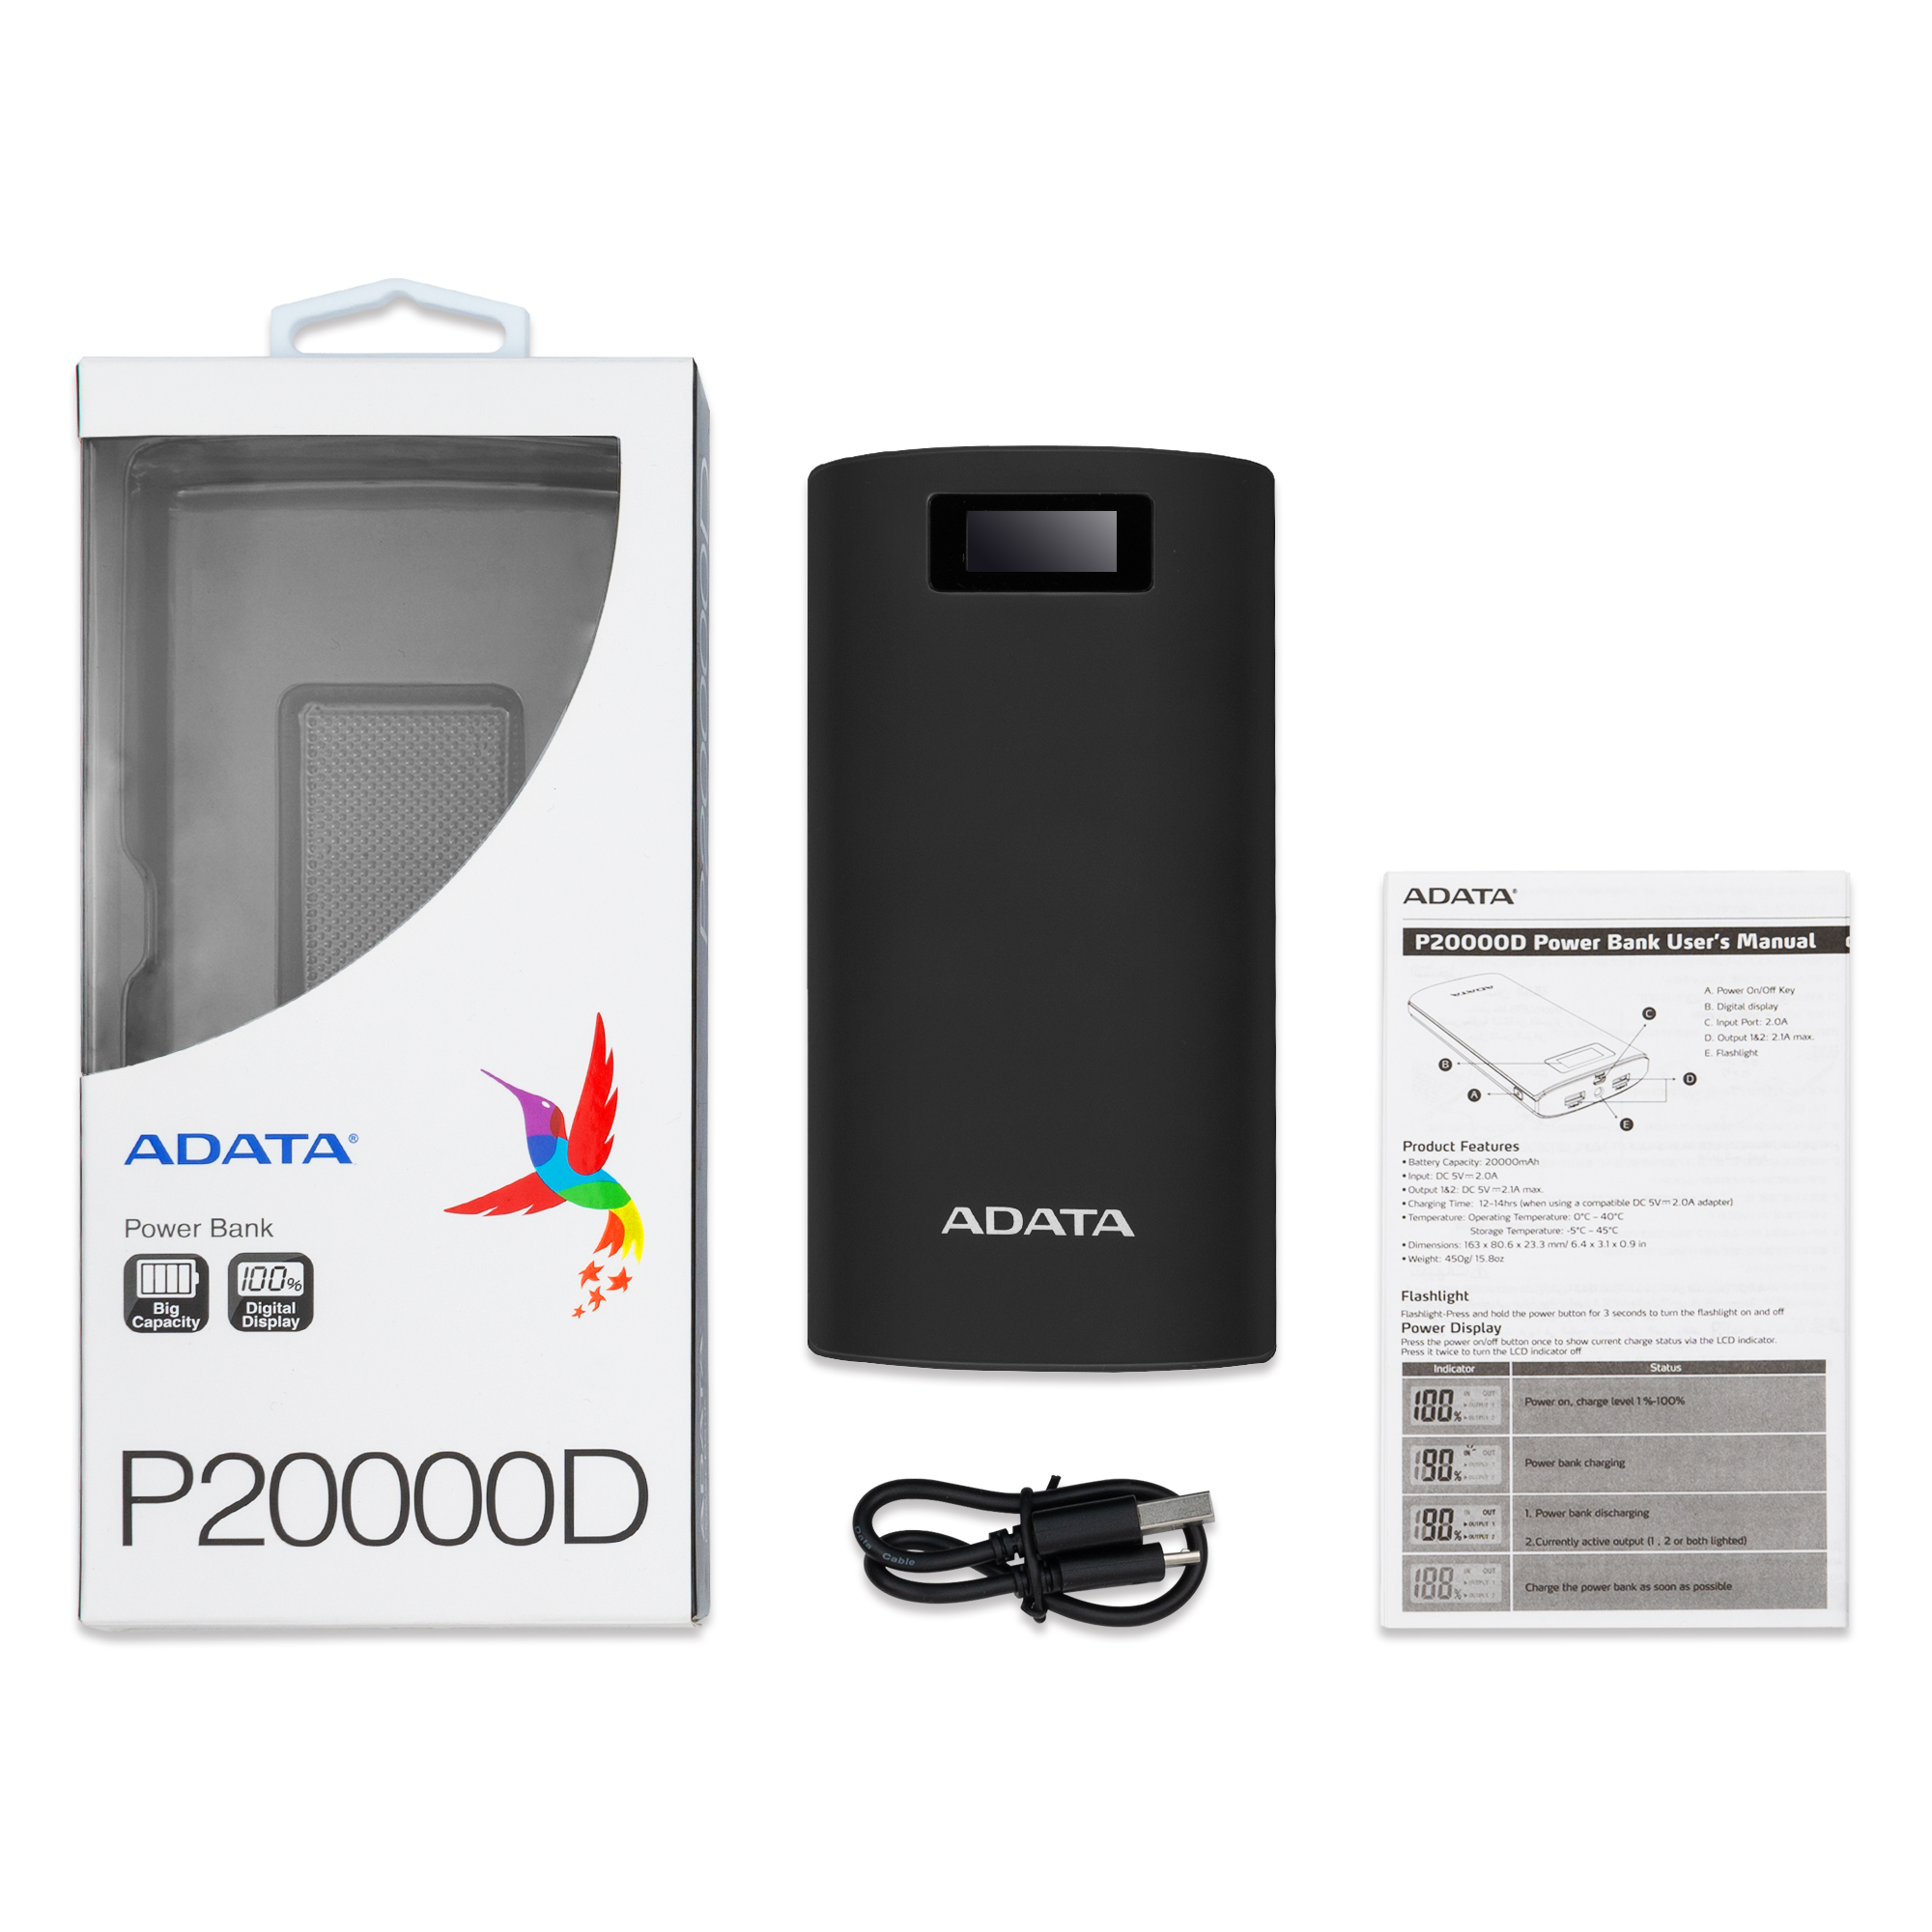 Rusty peppermint glance P20000D Portable Power Bank | Specification | ADATA Consumer